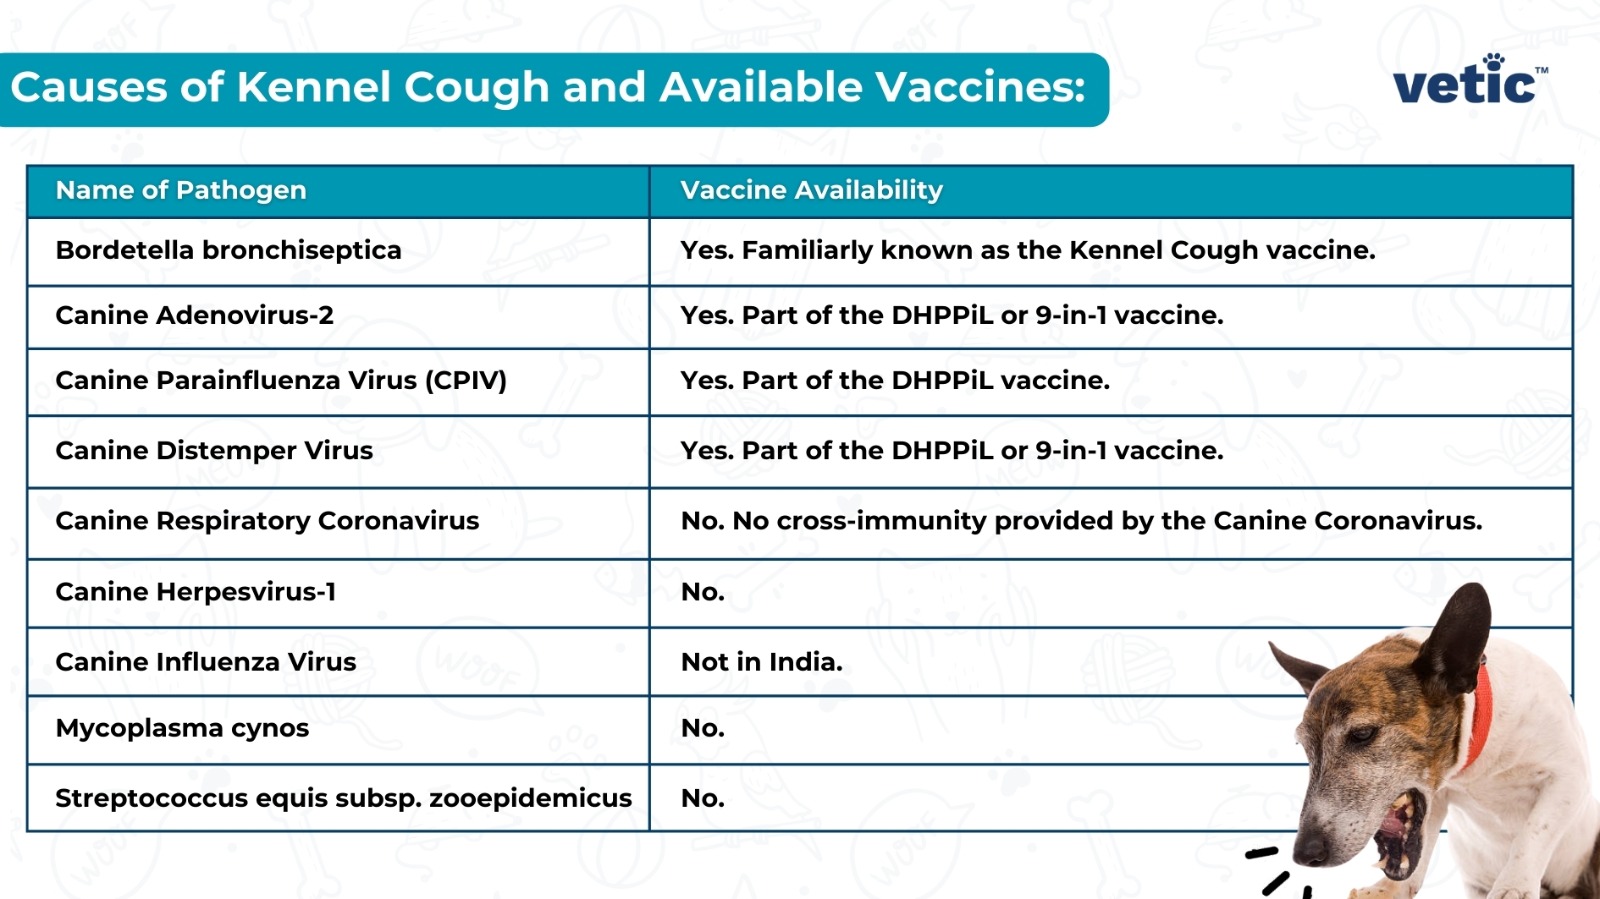 The image presents an educational chart titled “Causes of Kennel Cough and Available Vaccines.” It lists eight pathogens in the “Name of Pathogen” column and their corresponding vaccine availability status in the “Vaccine Availability” column. The chart includes common pathogens like Bordetella bronchiseptica, Canine Adenovirus-2, and Canine Parainfluenza Virus, among others. Notably, vaccines are not available for Canine Respiratory Coronavirus, Canine Herpesvirus-1, and Mycoplasma cynos. The ‘vetic’ logo is visible in the top right corner. A dog with a red collar is depicted at the bottom right, adding a visual element to the informative content.